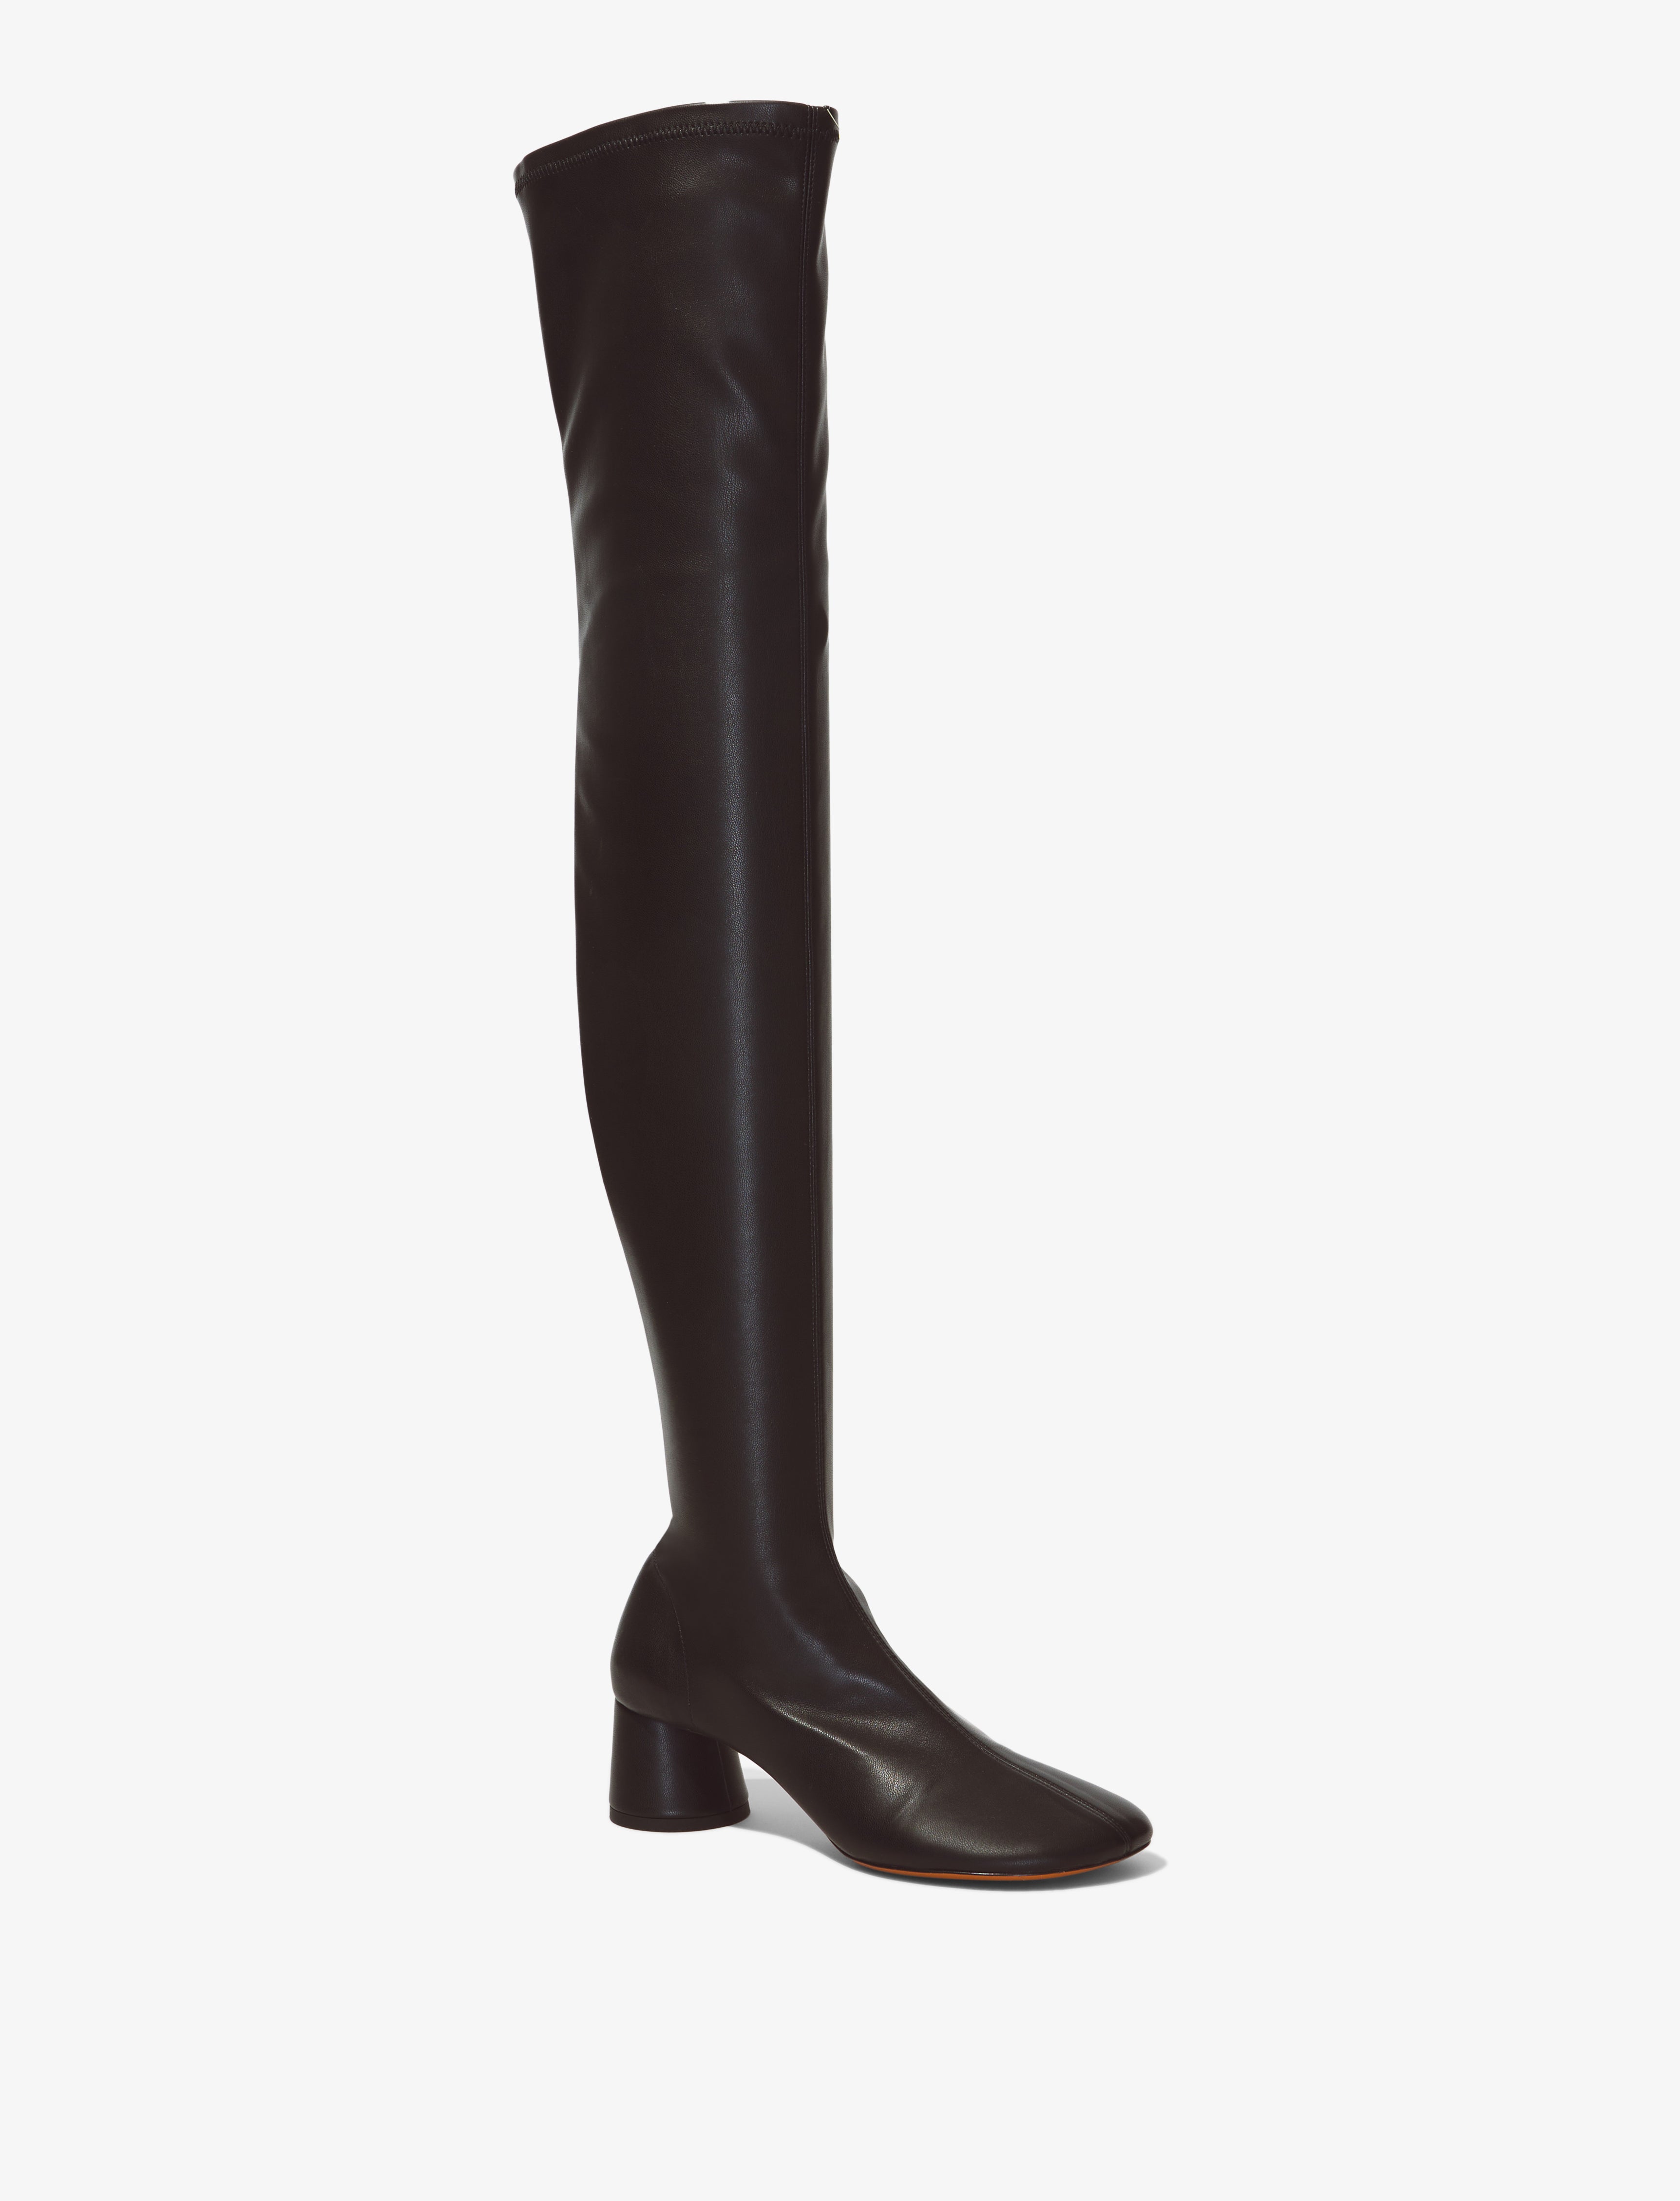 Glove Stretch Over The Knee Boots – Proenza Schouler